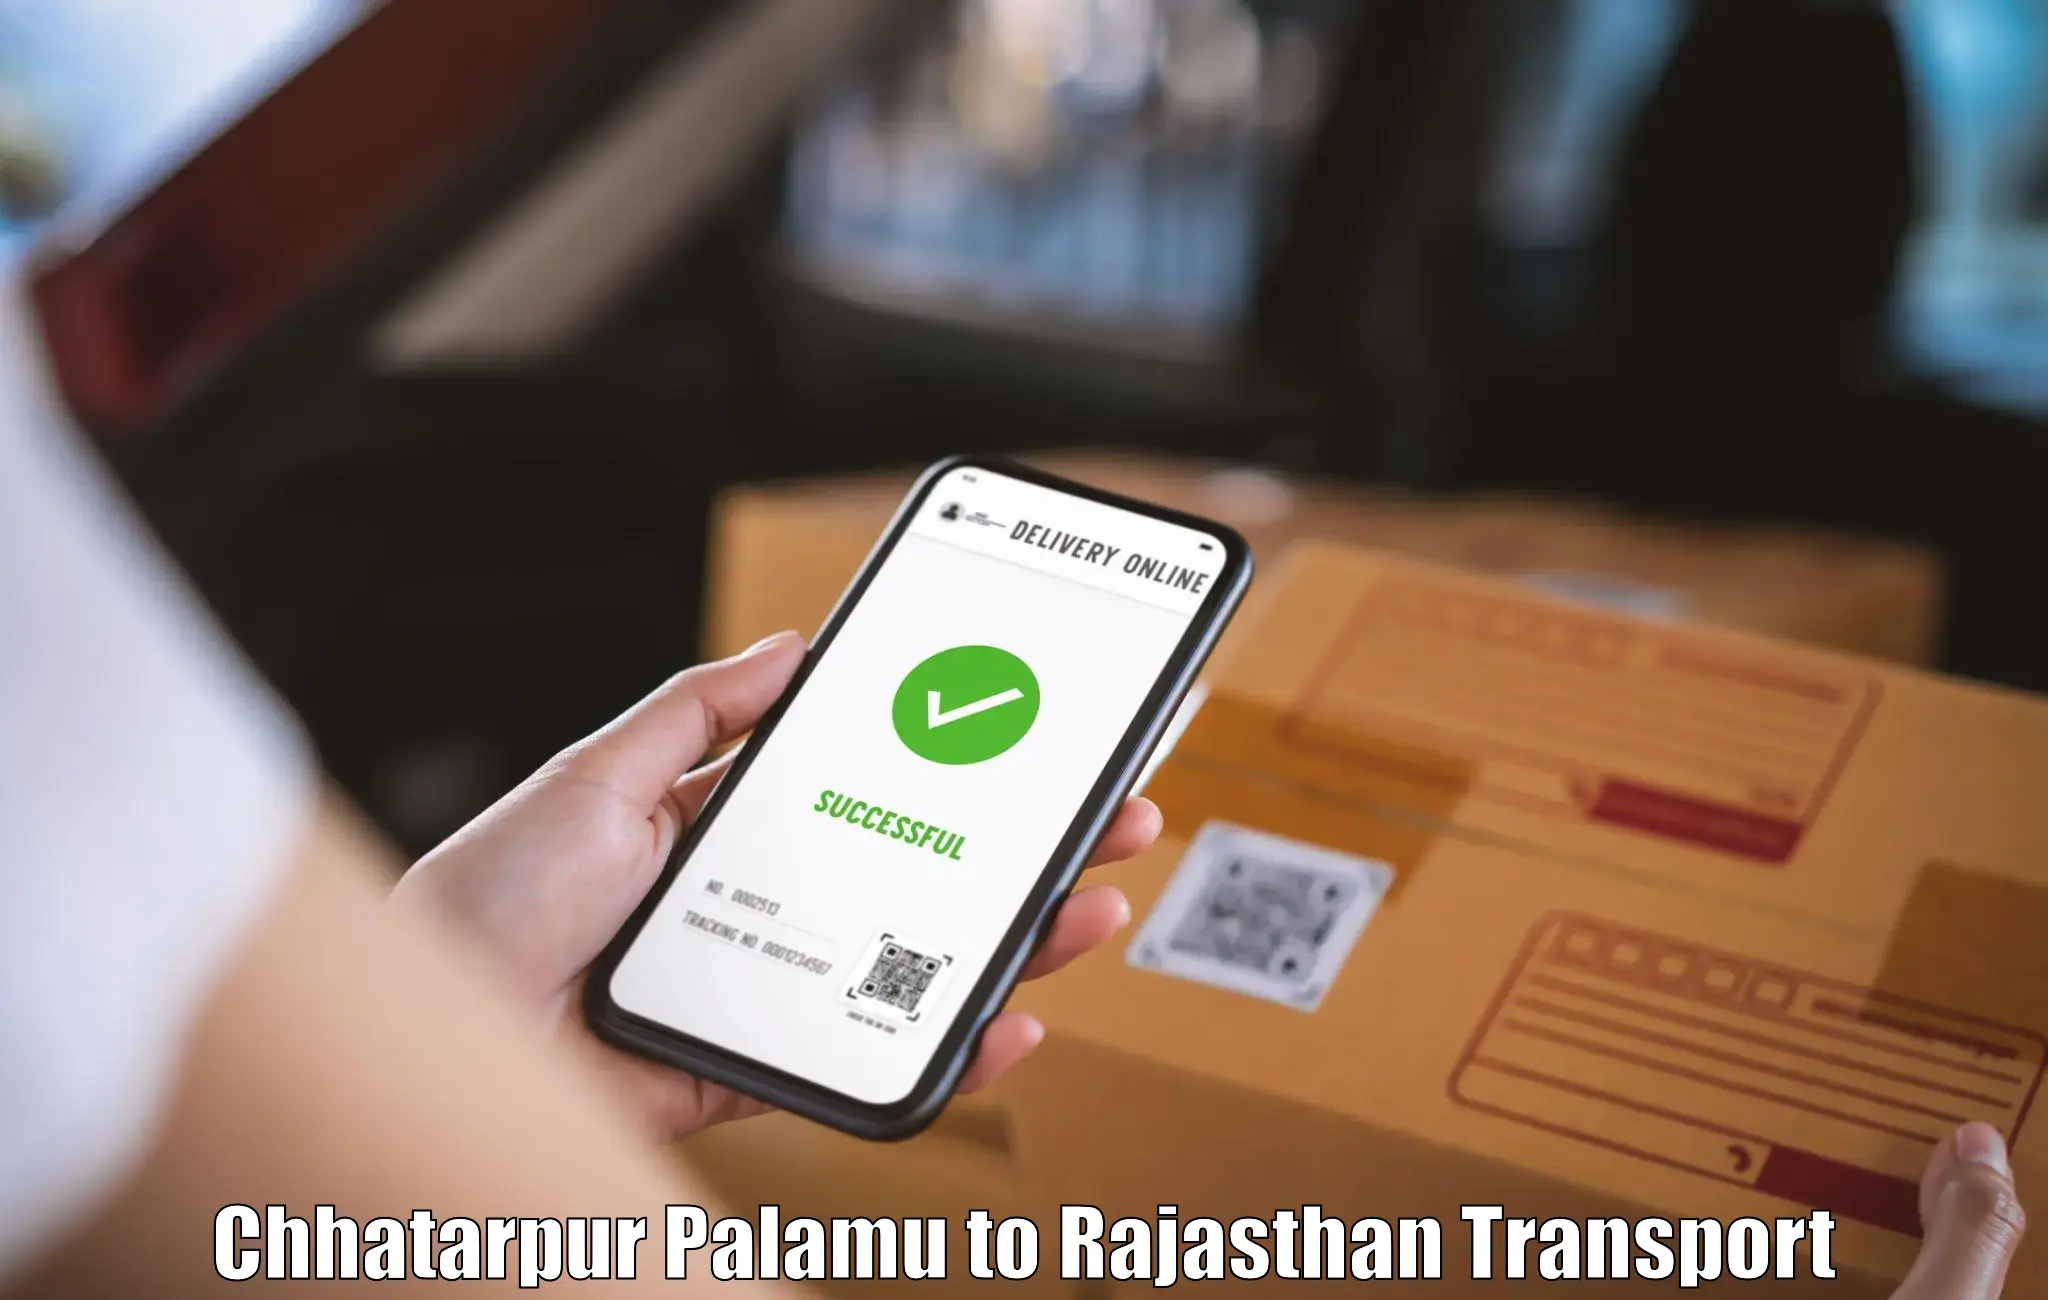 Goods delivery service Chhatarpur Palamu to Weir